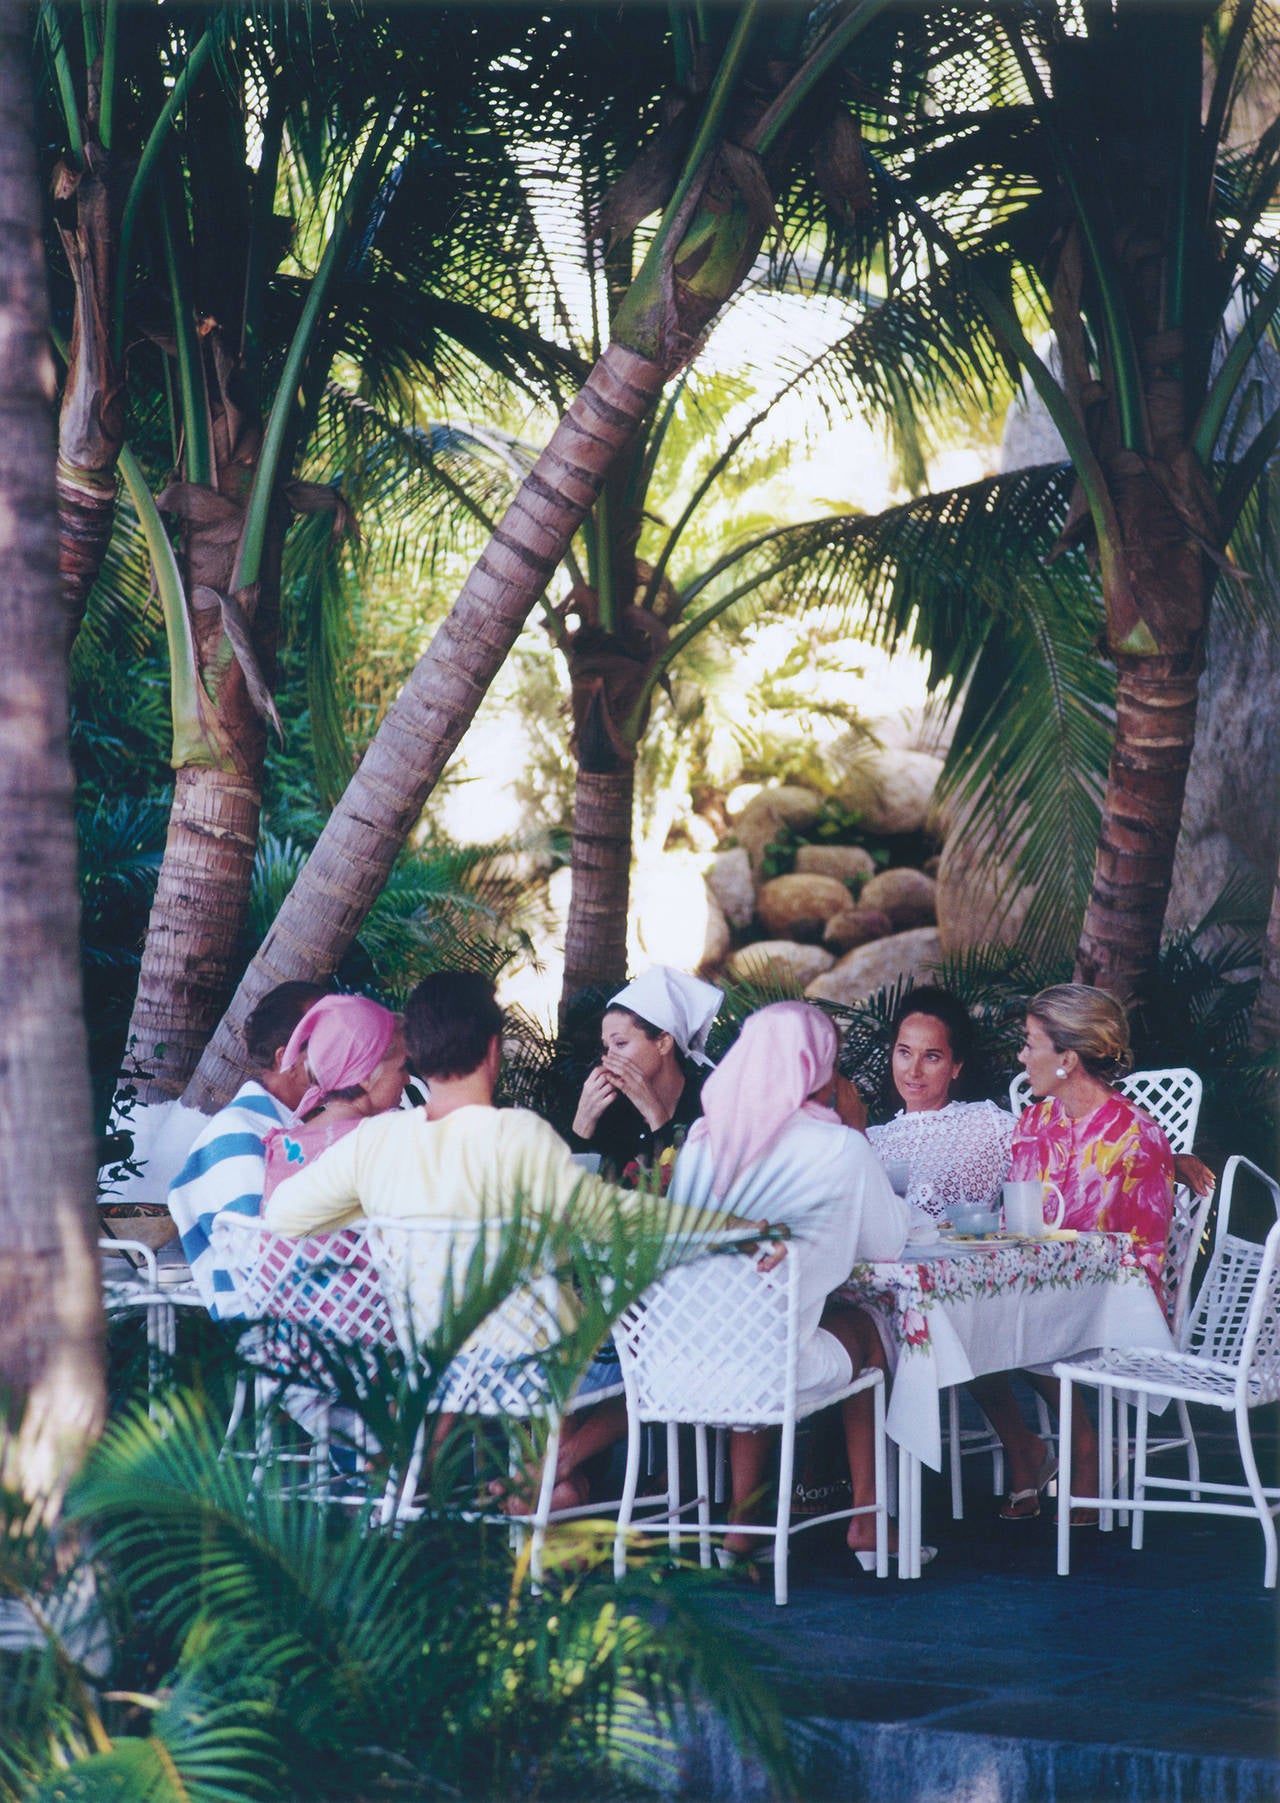 Slim Aarons Color Photograph - Oberon's Lunch (Aarons Estate Edition)